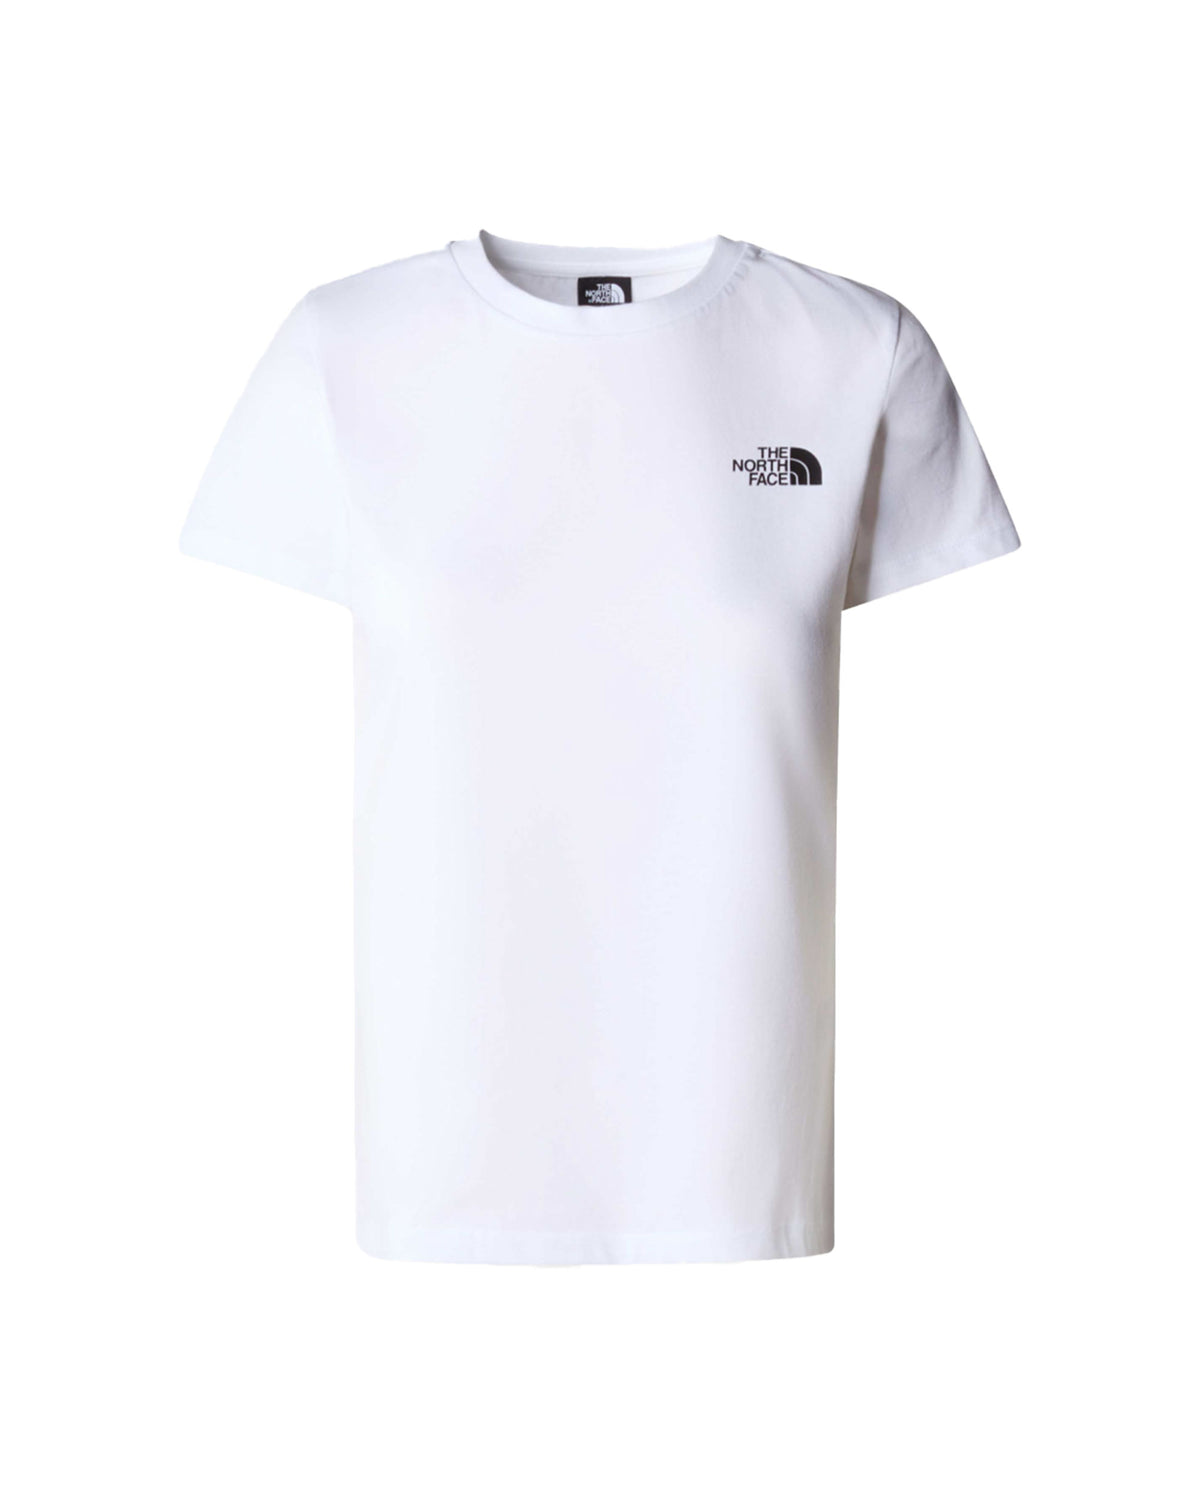 Woman's Tee The North Face Redbox Slim White